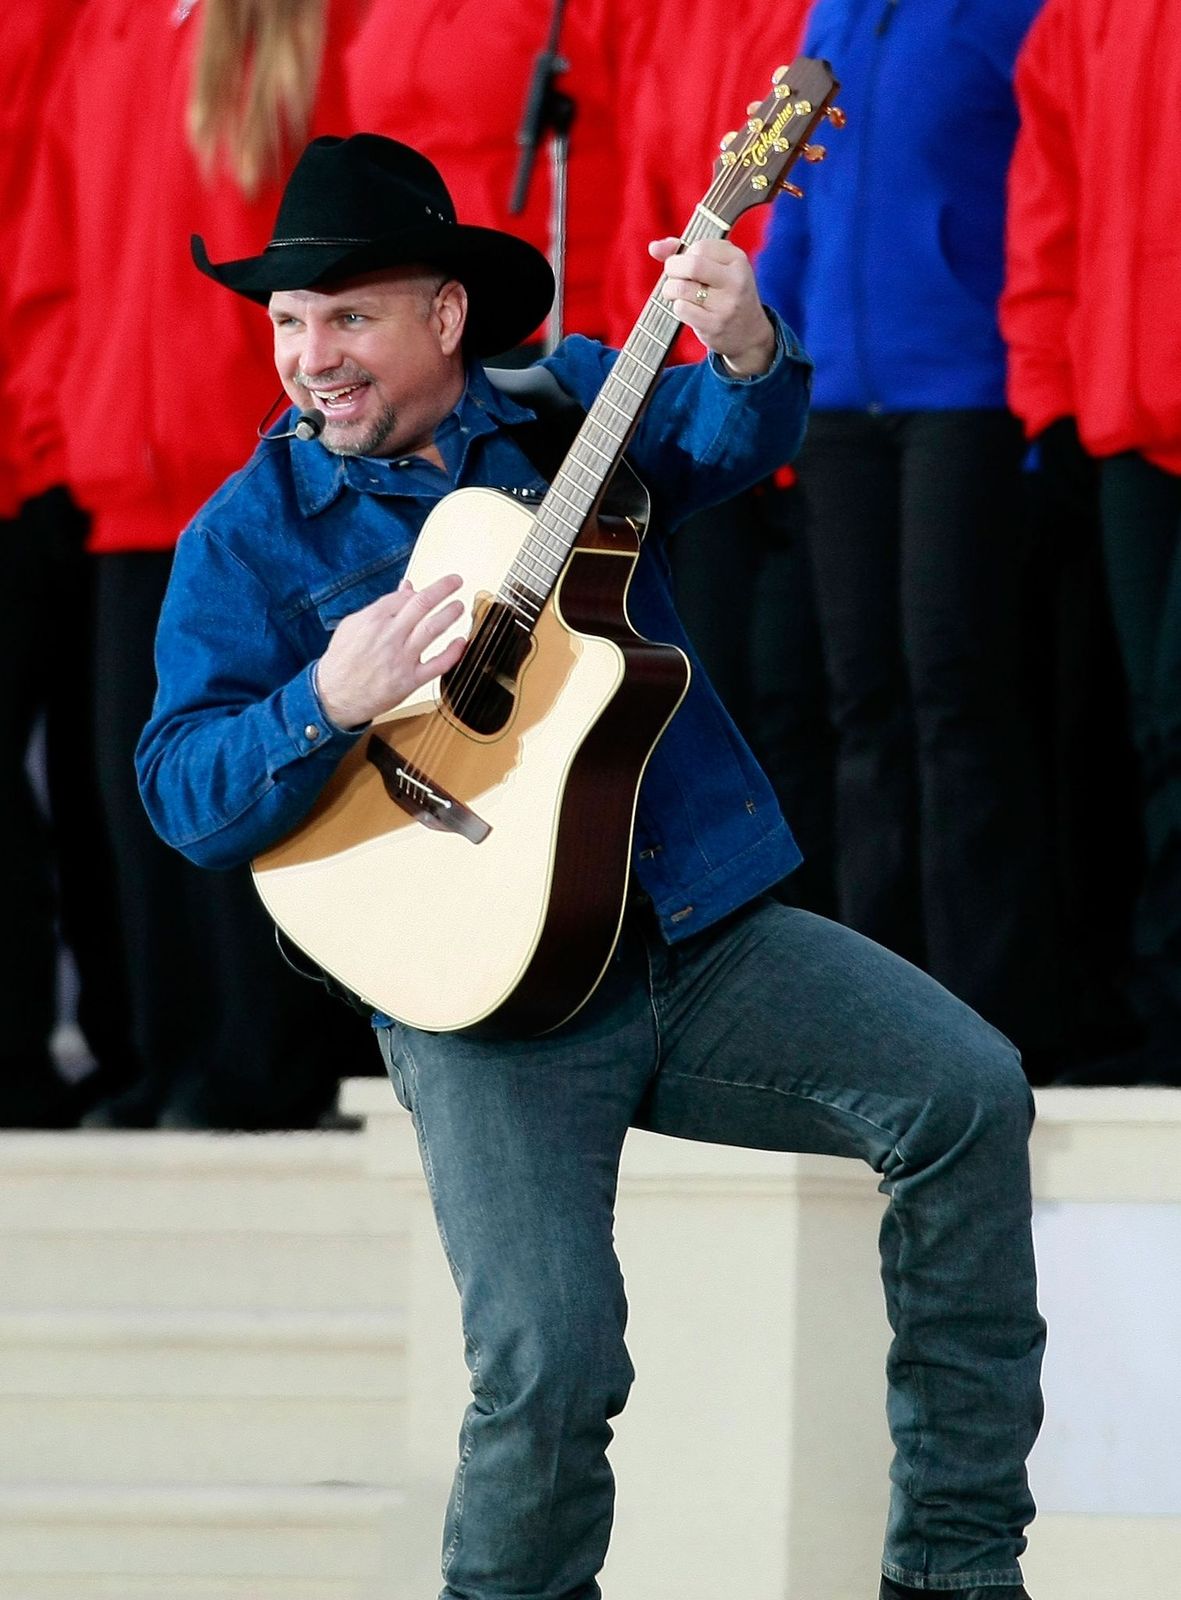 Garth Brooks at "We Are One: The Obama Inaugural Celebration At The Lincoln Memorial" on January 18, 2009. | Photo: Getty Images